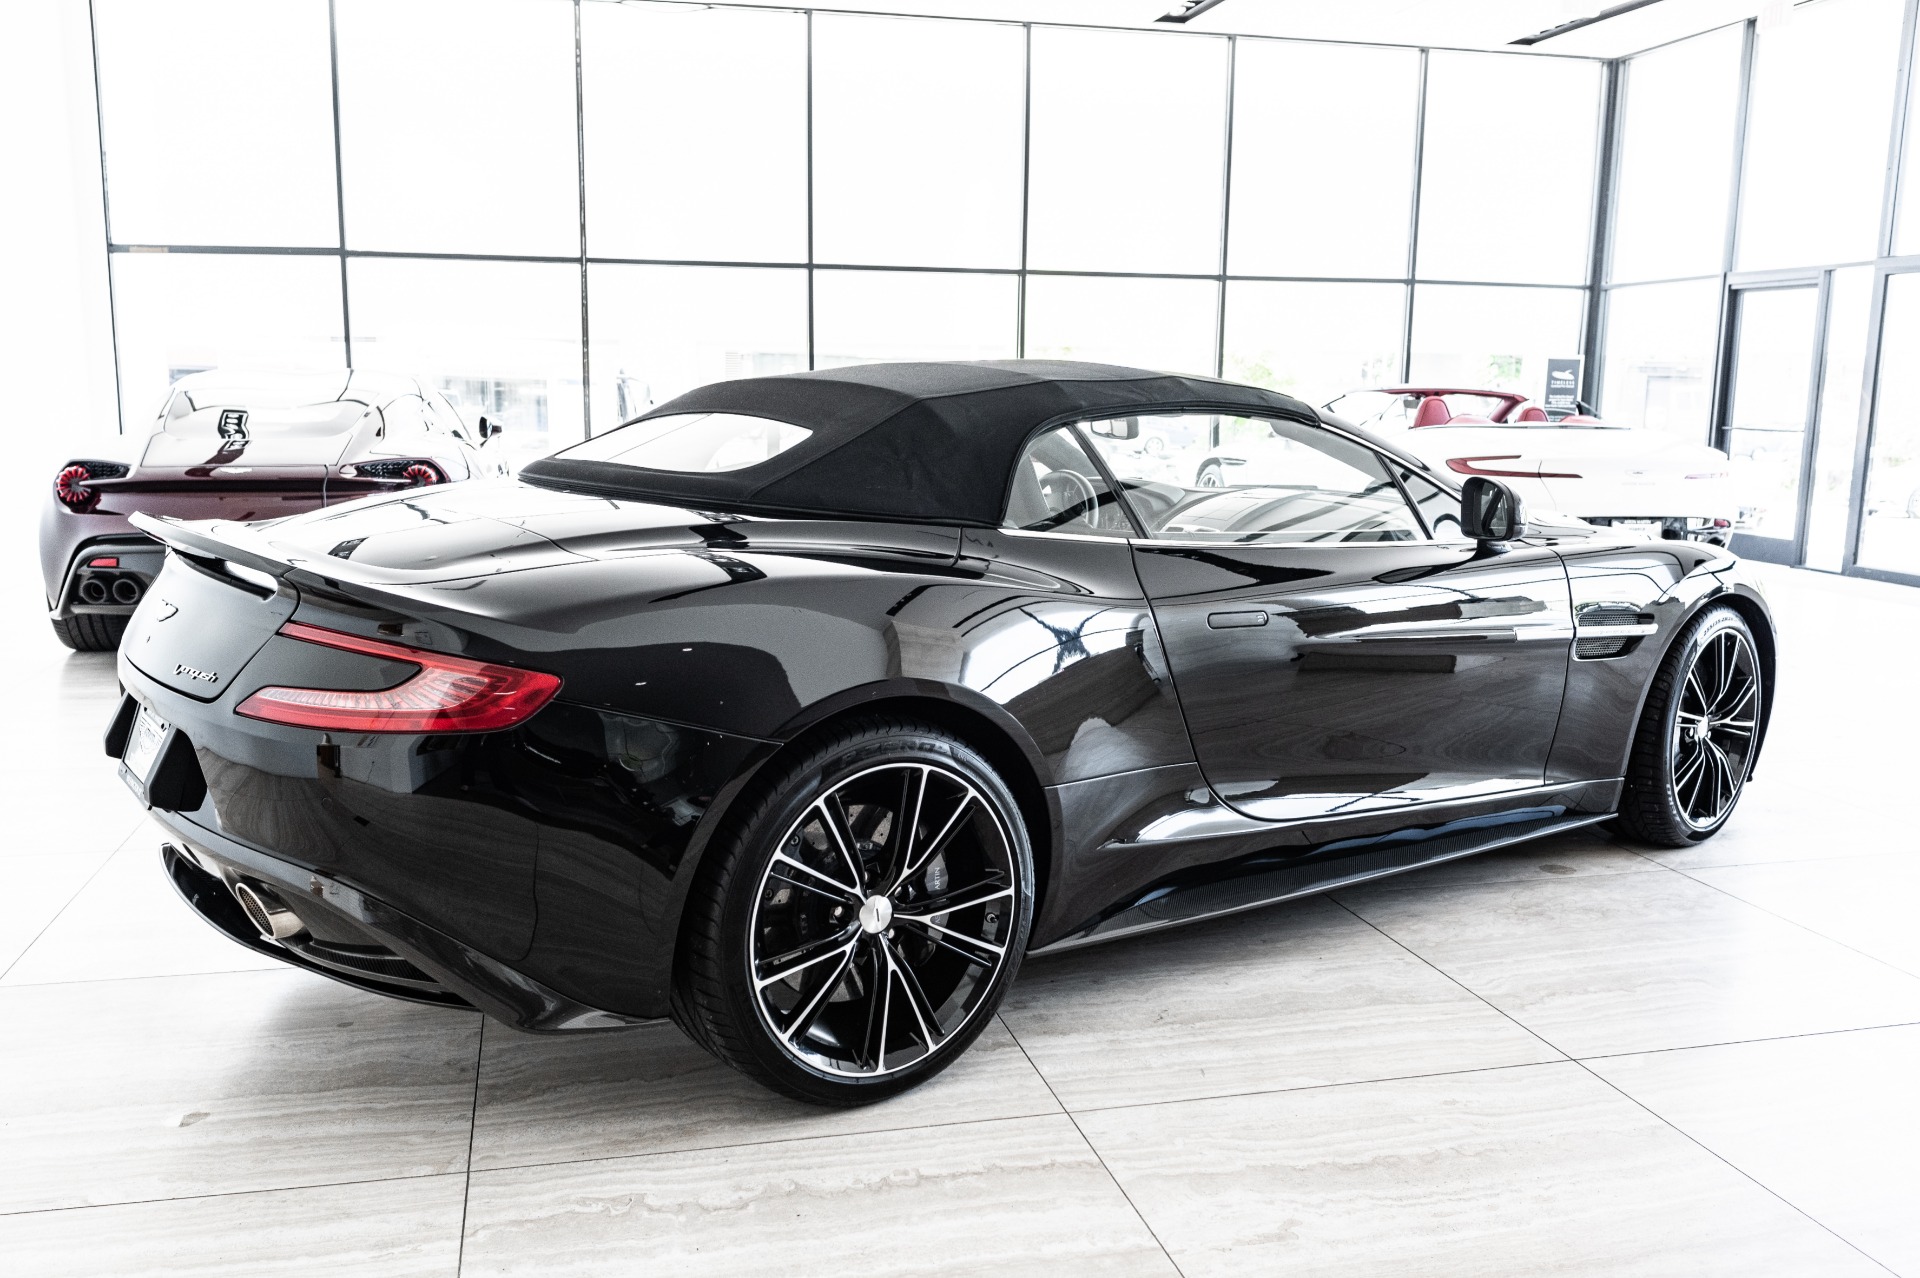 Elegance And Power: The Aston Martin Vanquish Carbon Edition